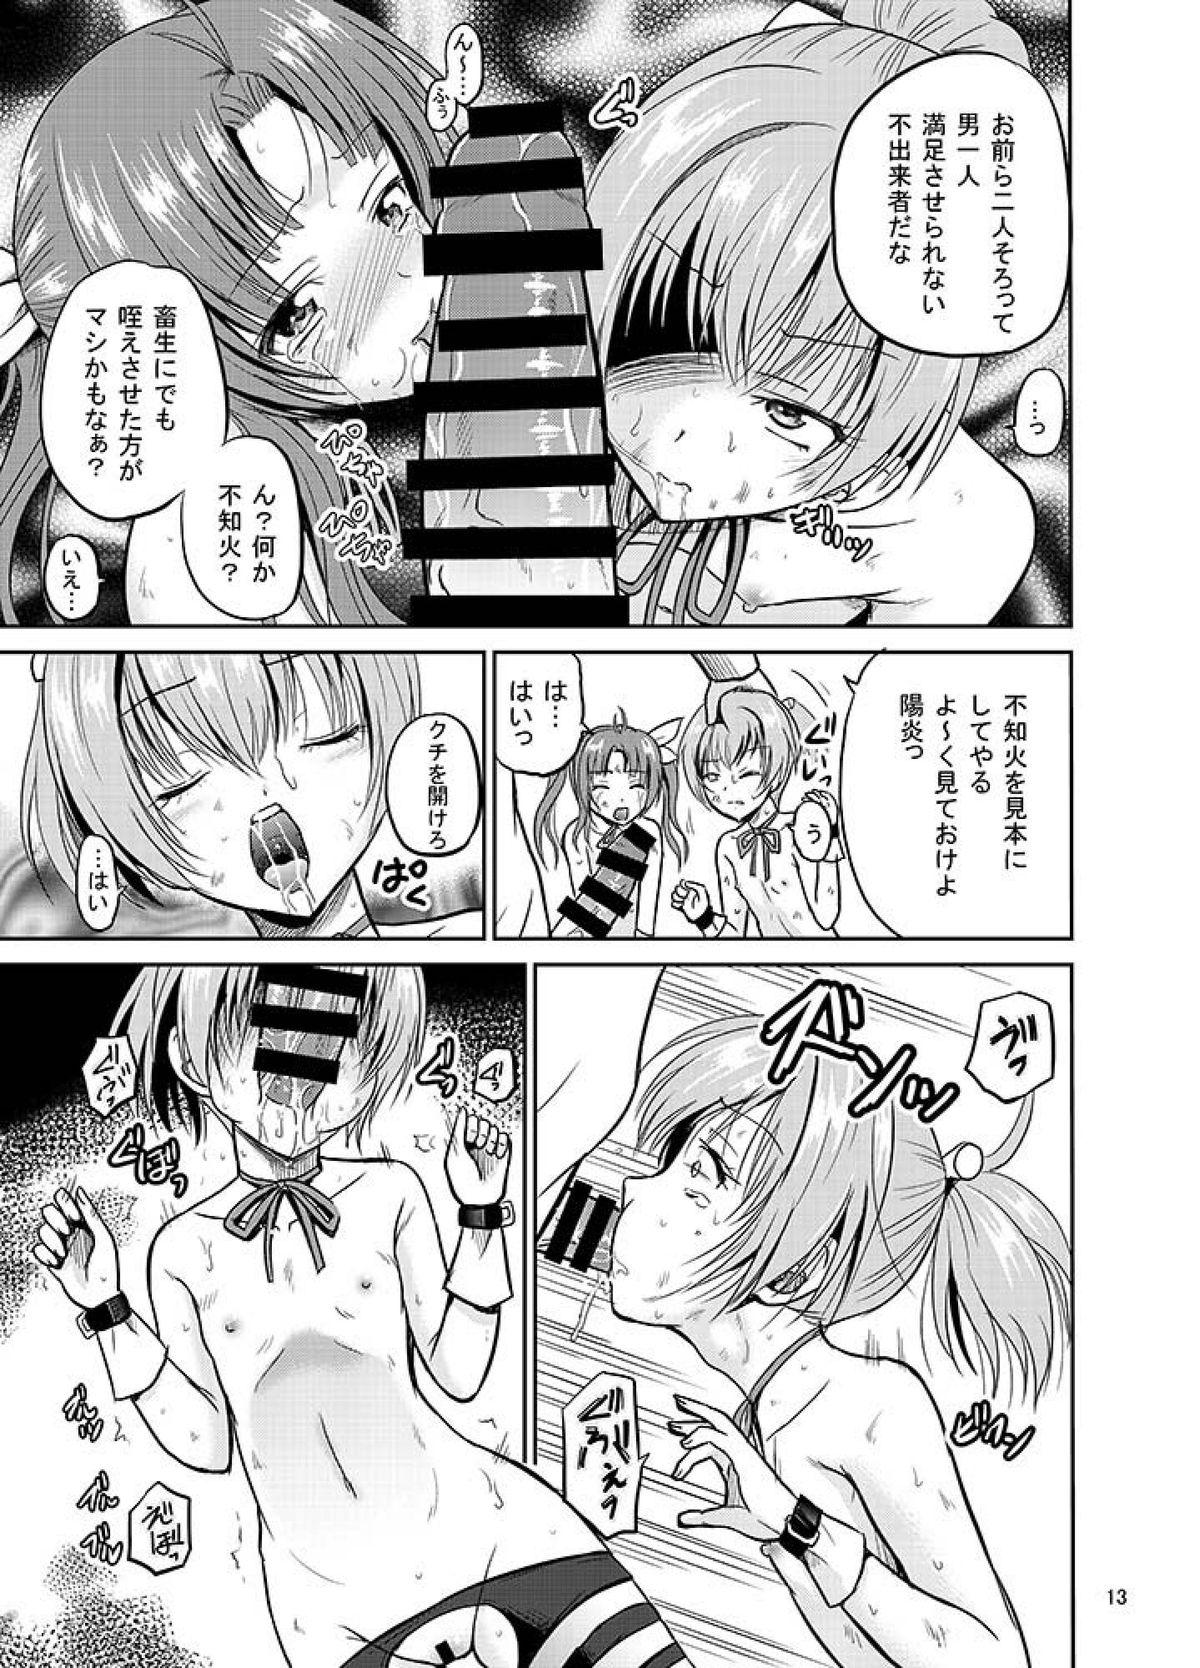 Ffm ARCANUMS24 - Kantai collection Blows - Page 13